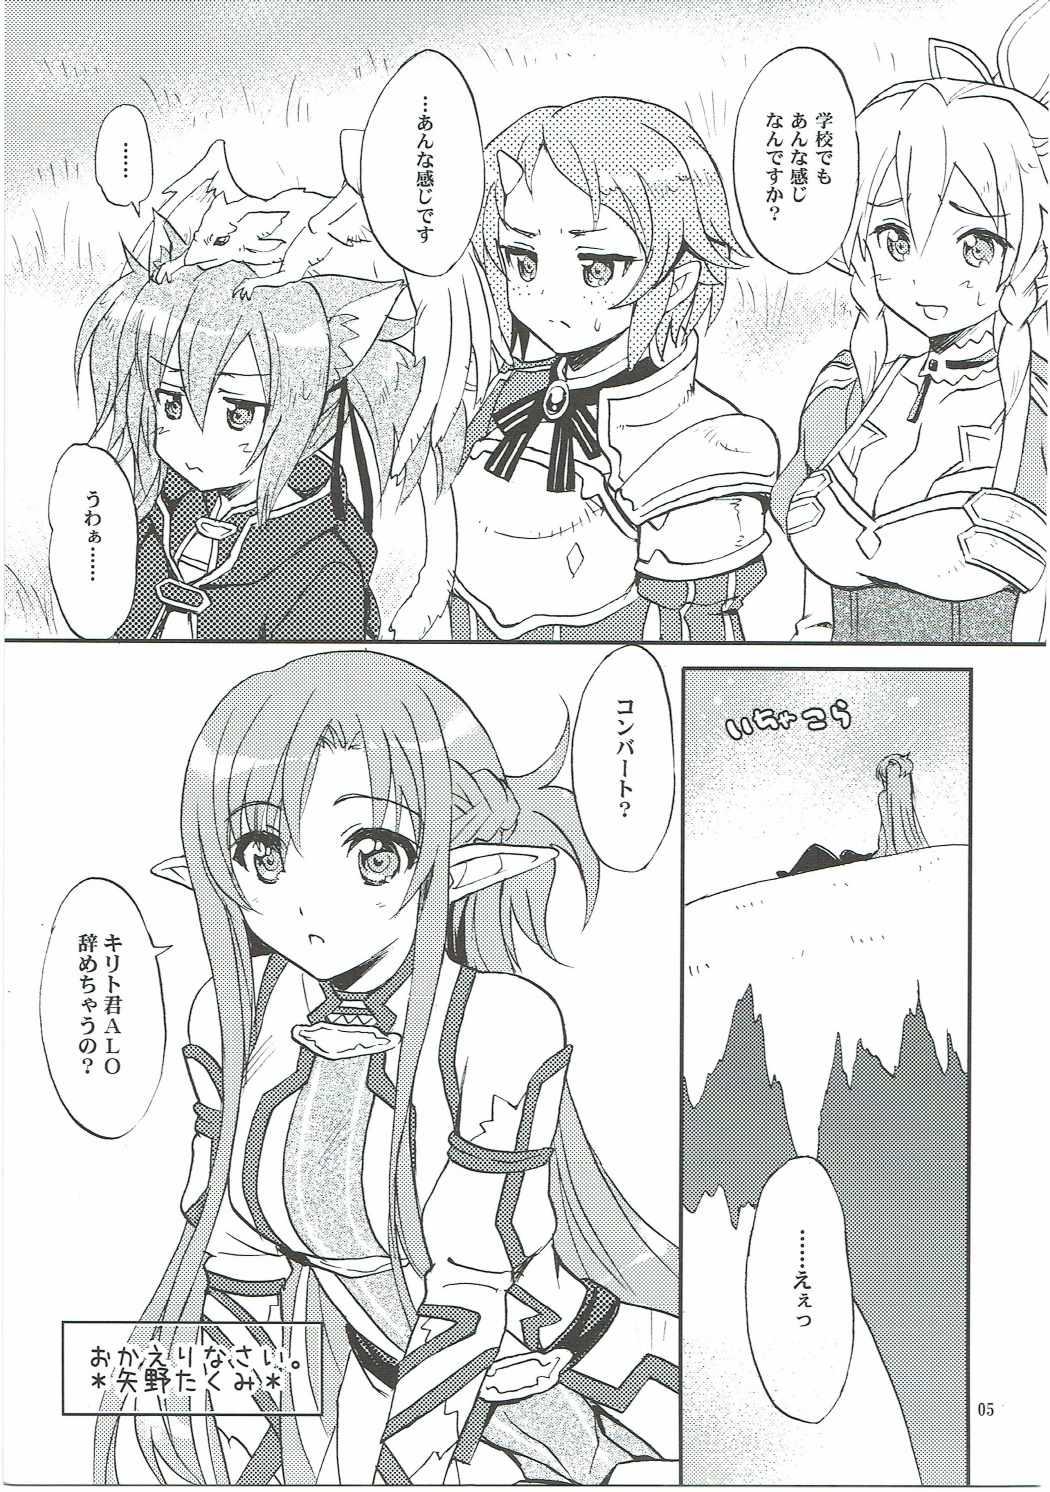 Bubble Home Sweet Home 2 - Sword art online Que - Page 4